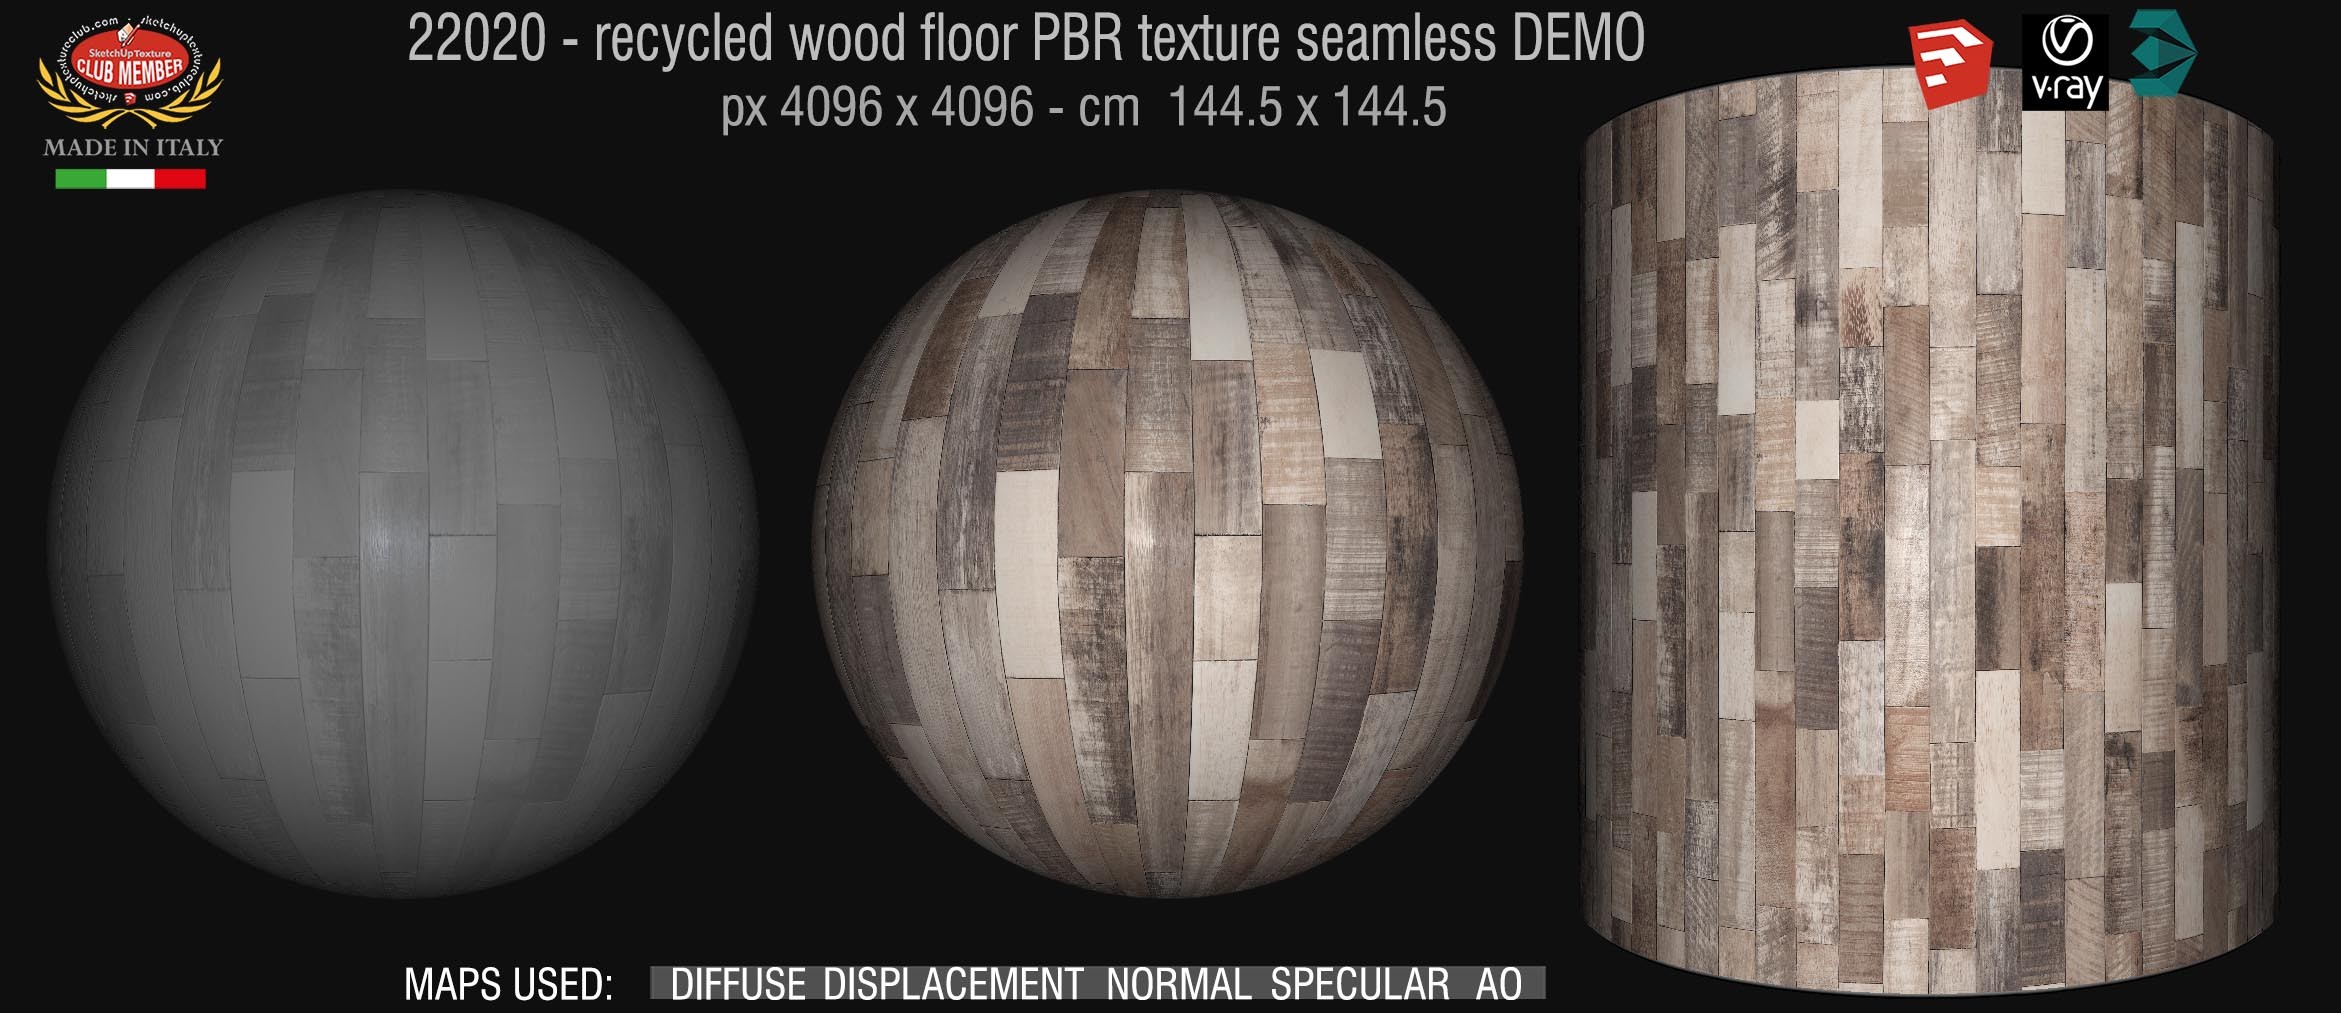 22020 recycled wood floor PBR texture seamless DEMO